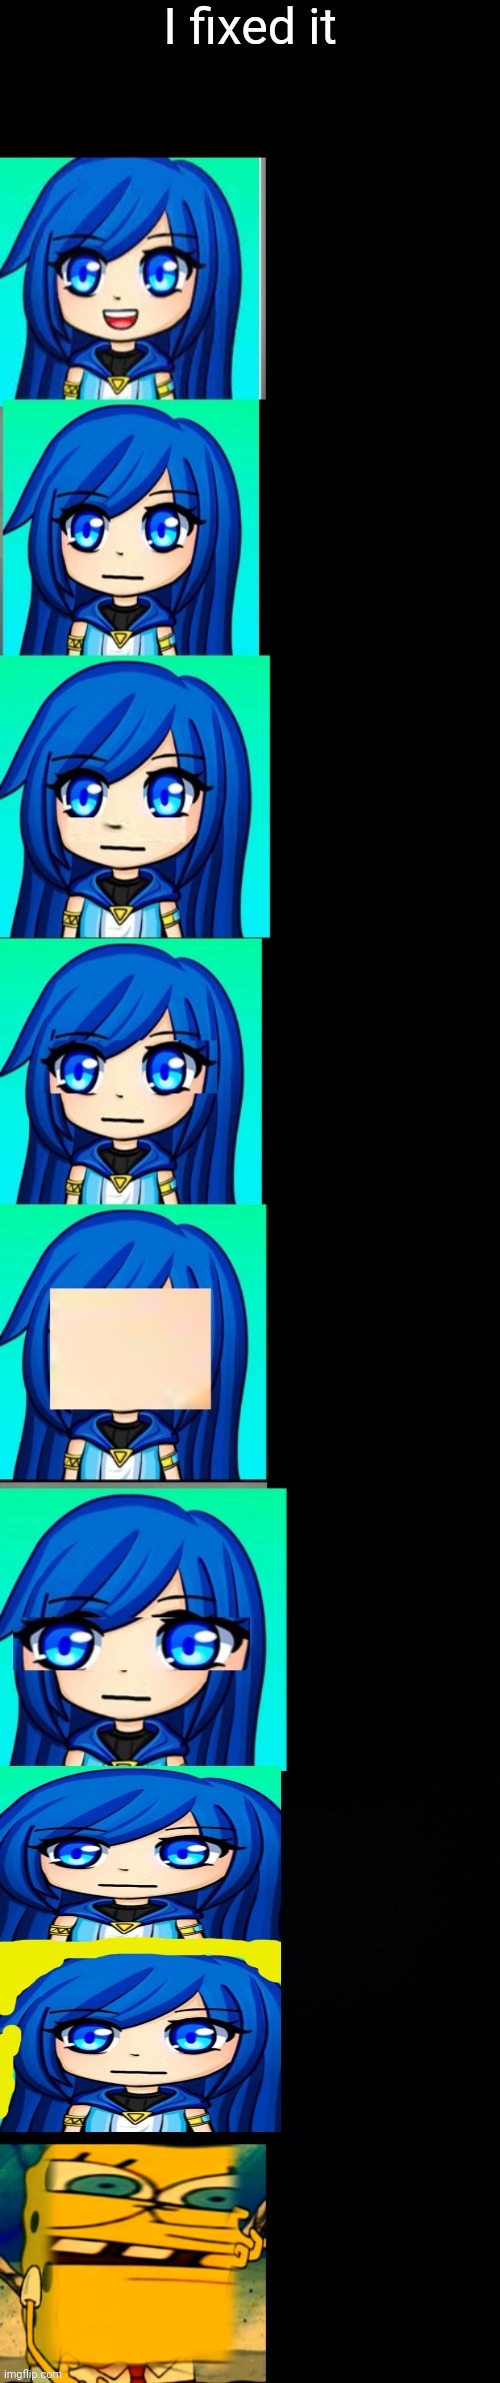 Itsfunneh becoming Idiot | I fixed it | image tagged in itsfunneh becoming idiot | made w/ Imgflip meme maker